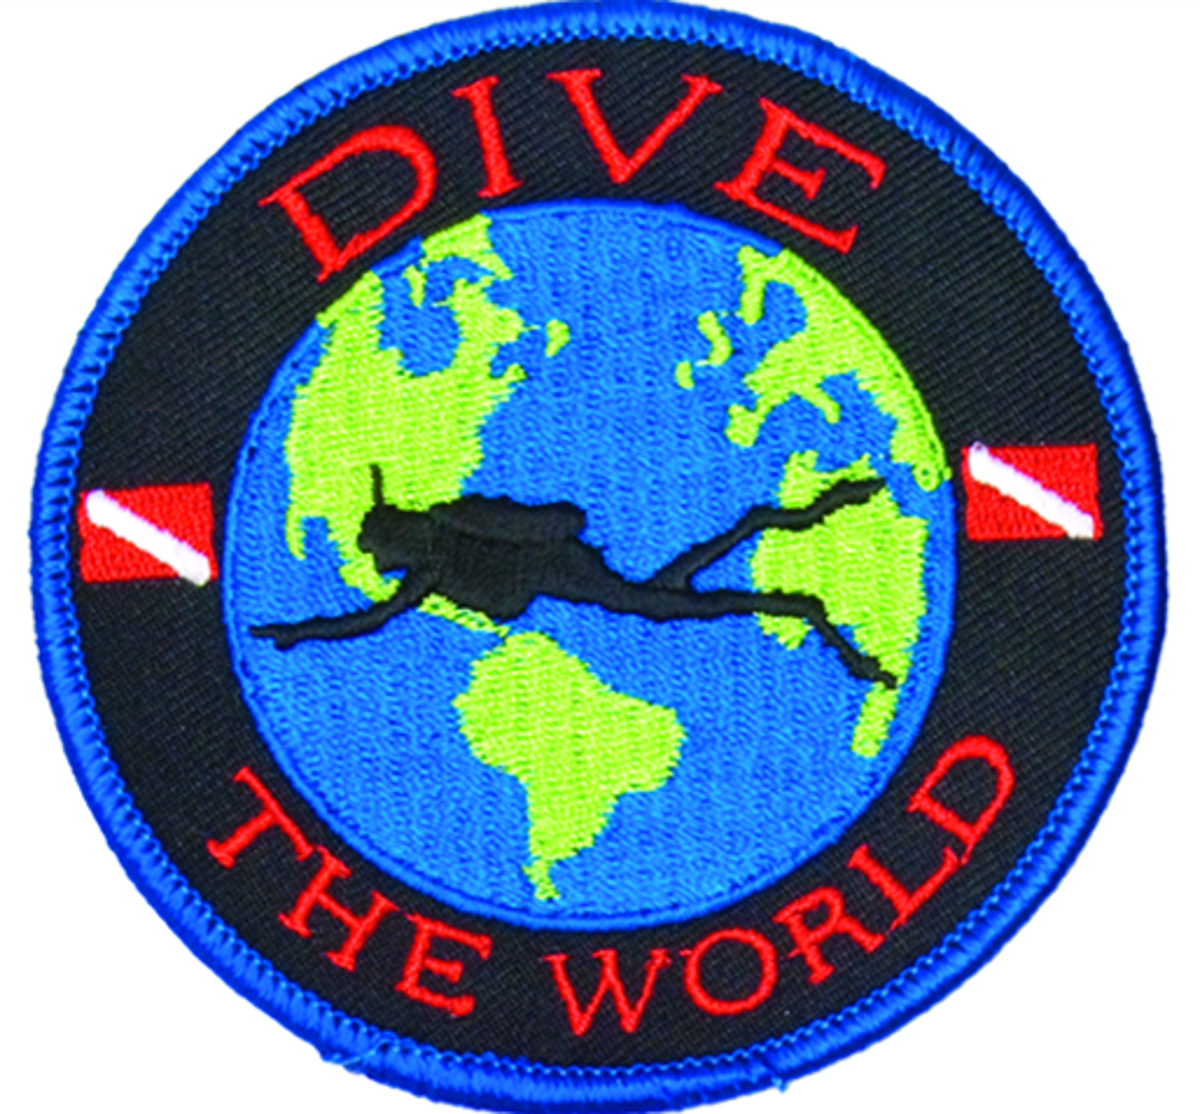 Innovative Embroidered Dive The World Patch